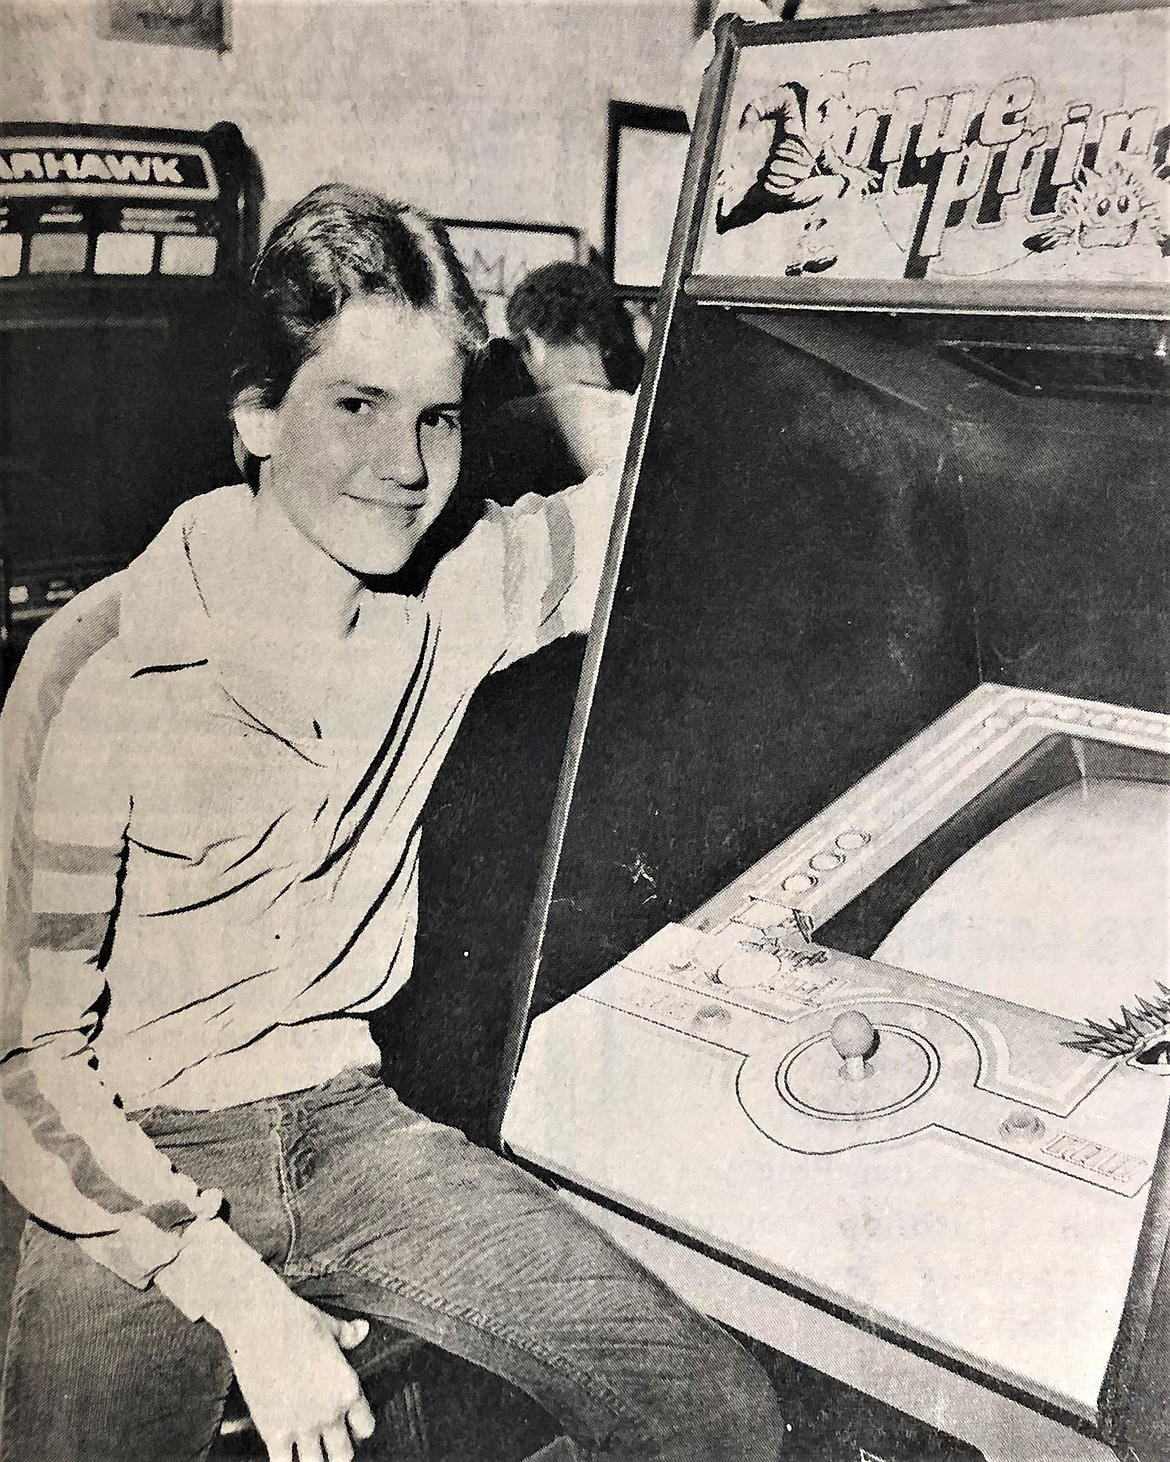 Jim O'Brien pictured with his world record-breaking Coeur d'Alene video machine.